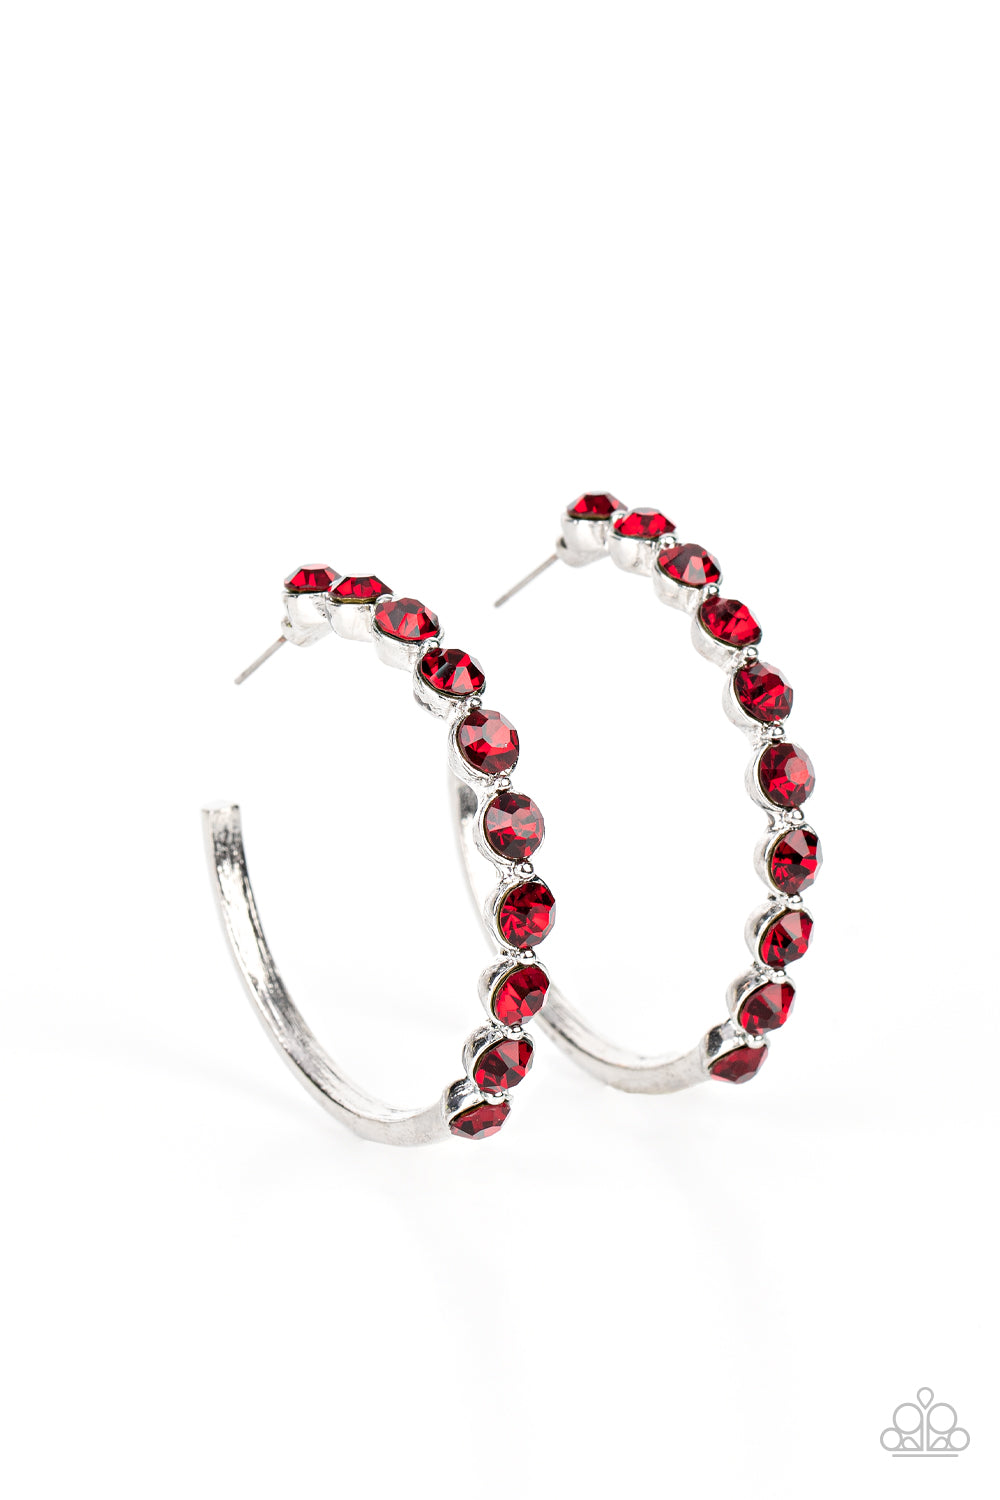 Photo Finish Paparazzi Accessories Earrings -Red